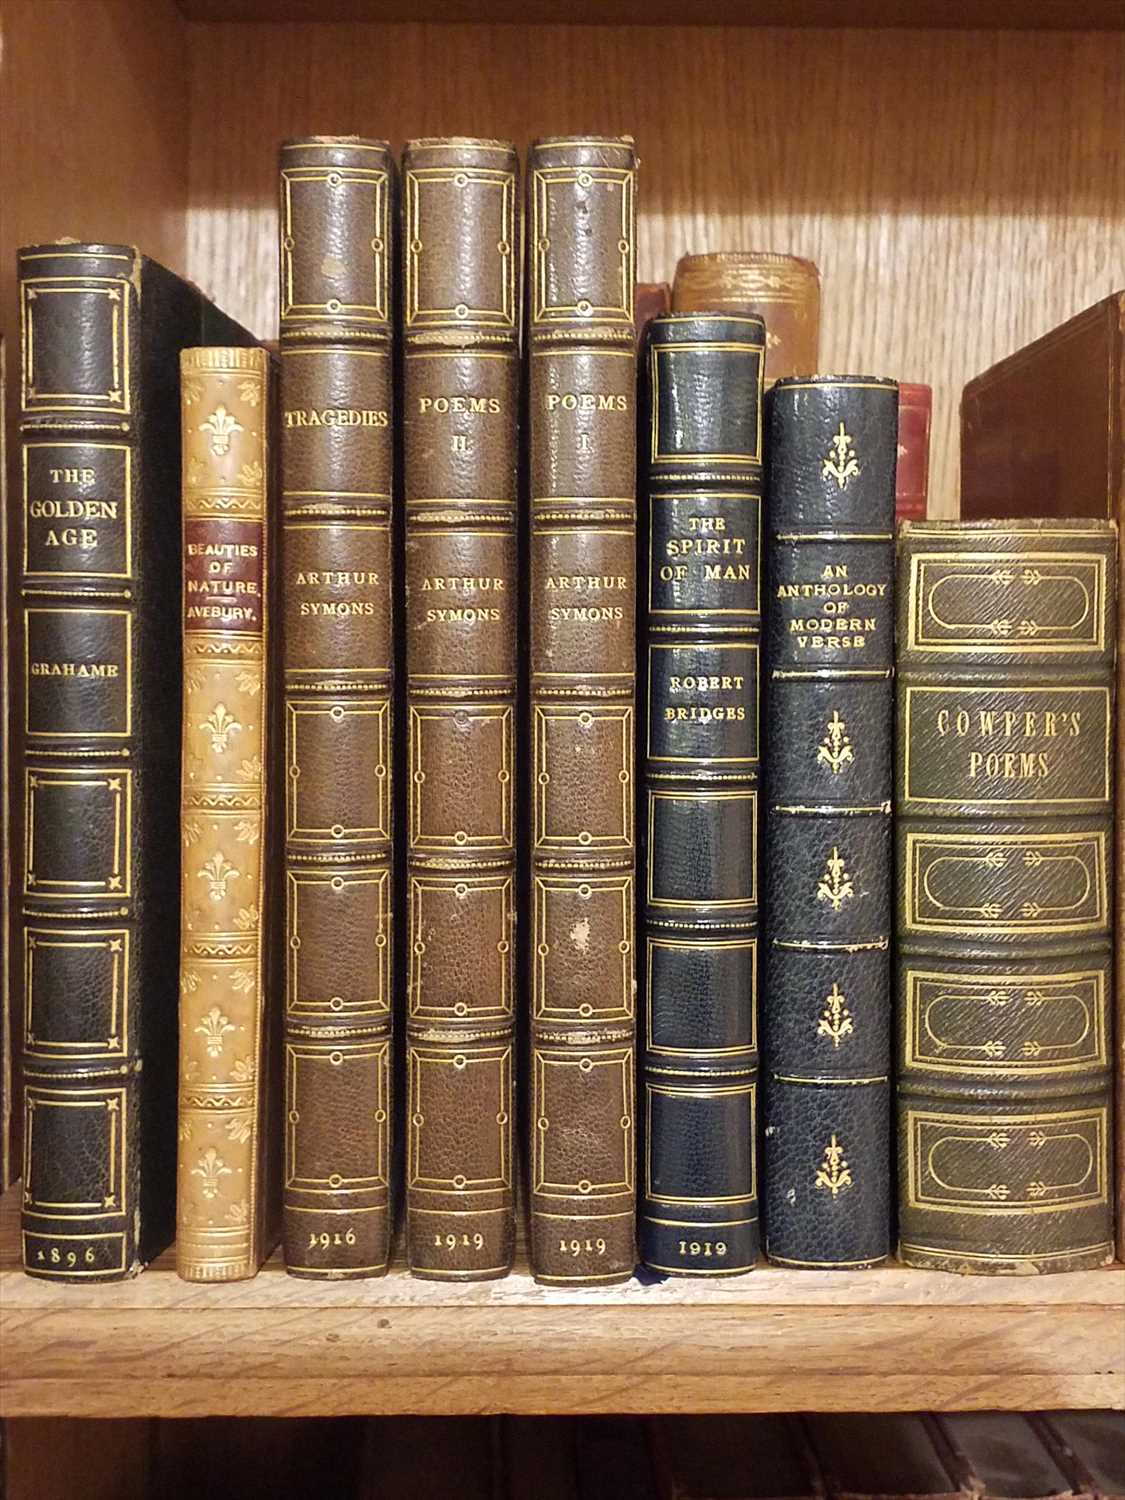 Lot 268 - Bindings. Approximately 95 volumes of gilt decorated leather bindings